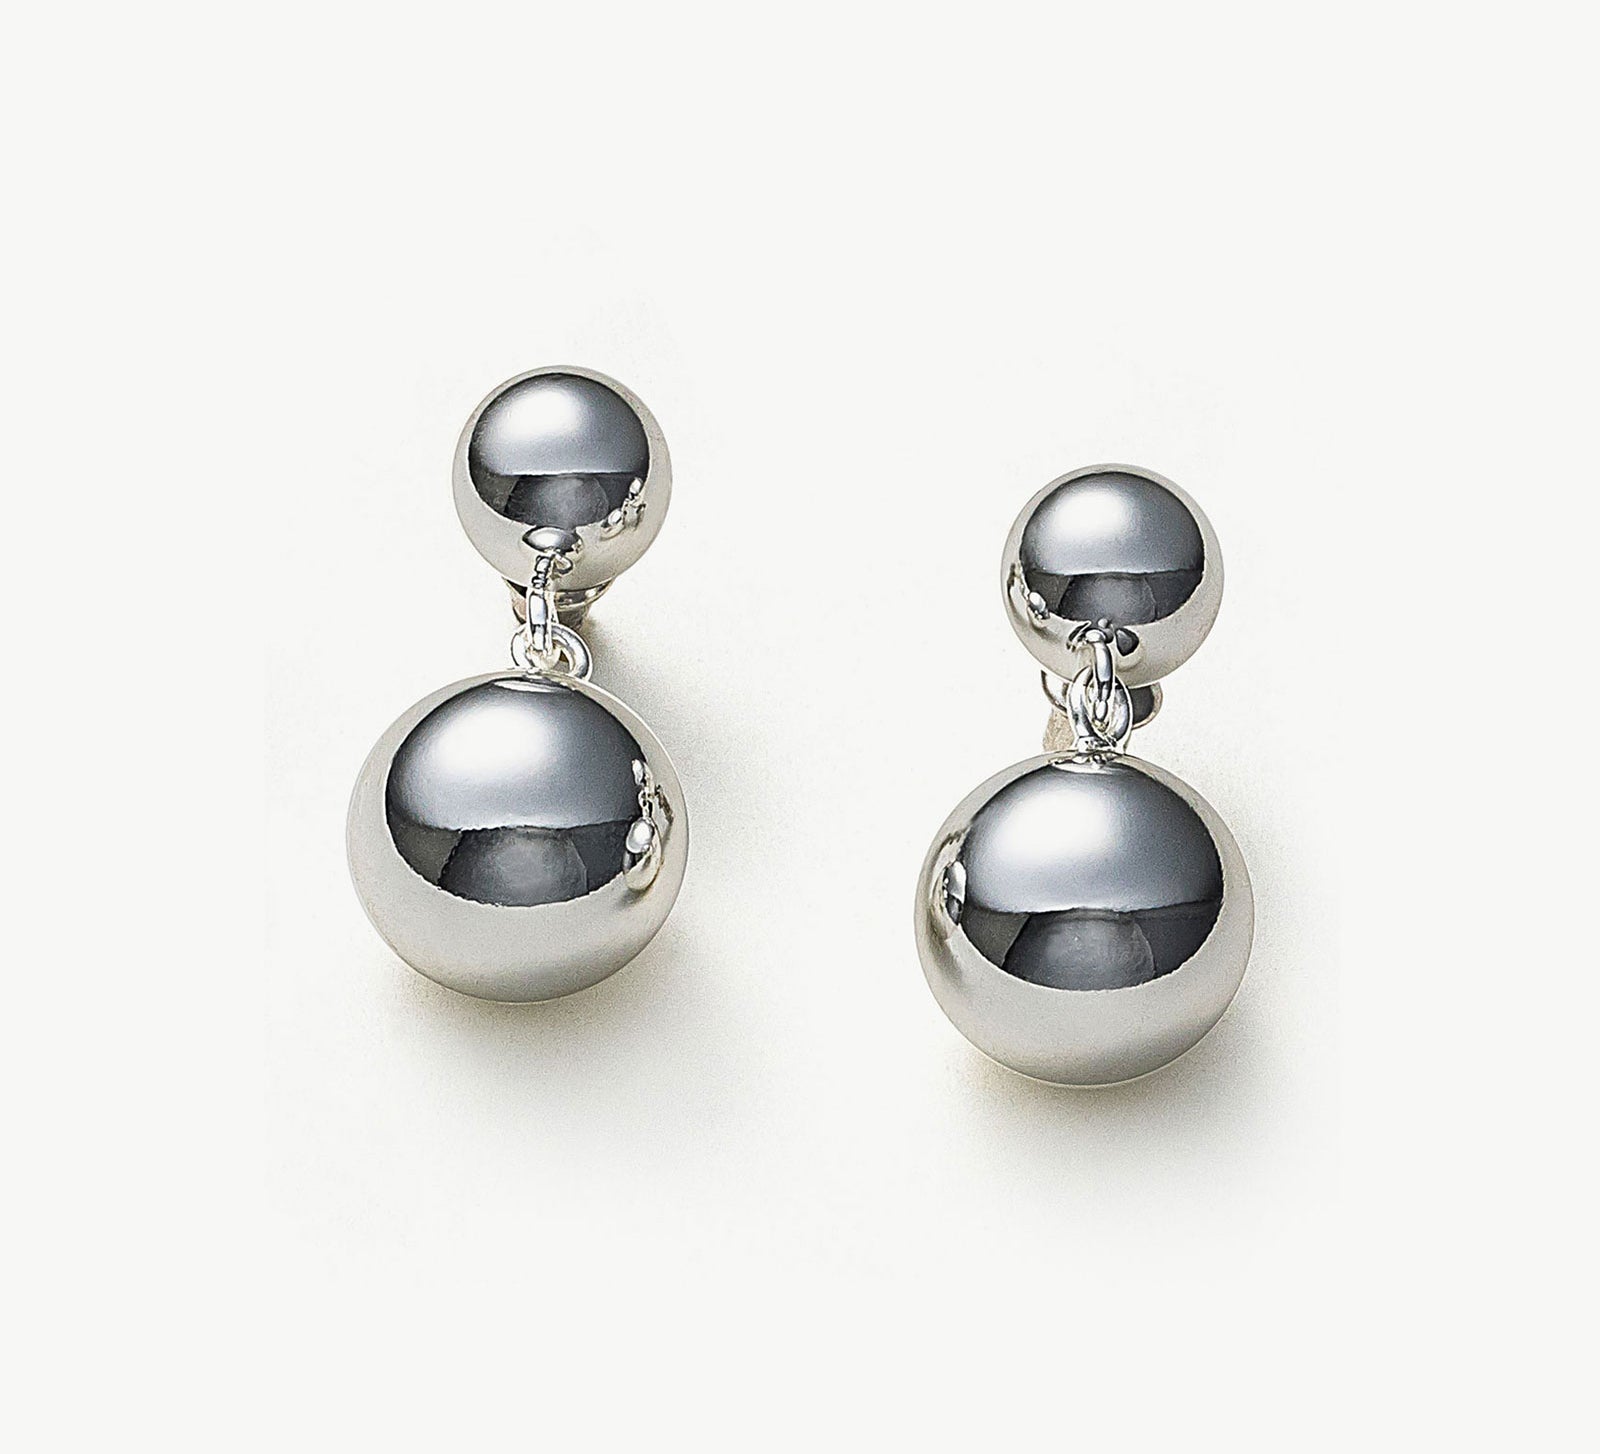 Double Sphere Hoop Earrings, a sculptural and elegant accessory featuring two spheres for a modern and sophisticated look.